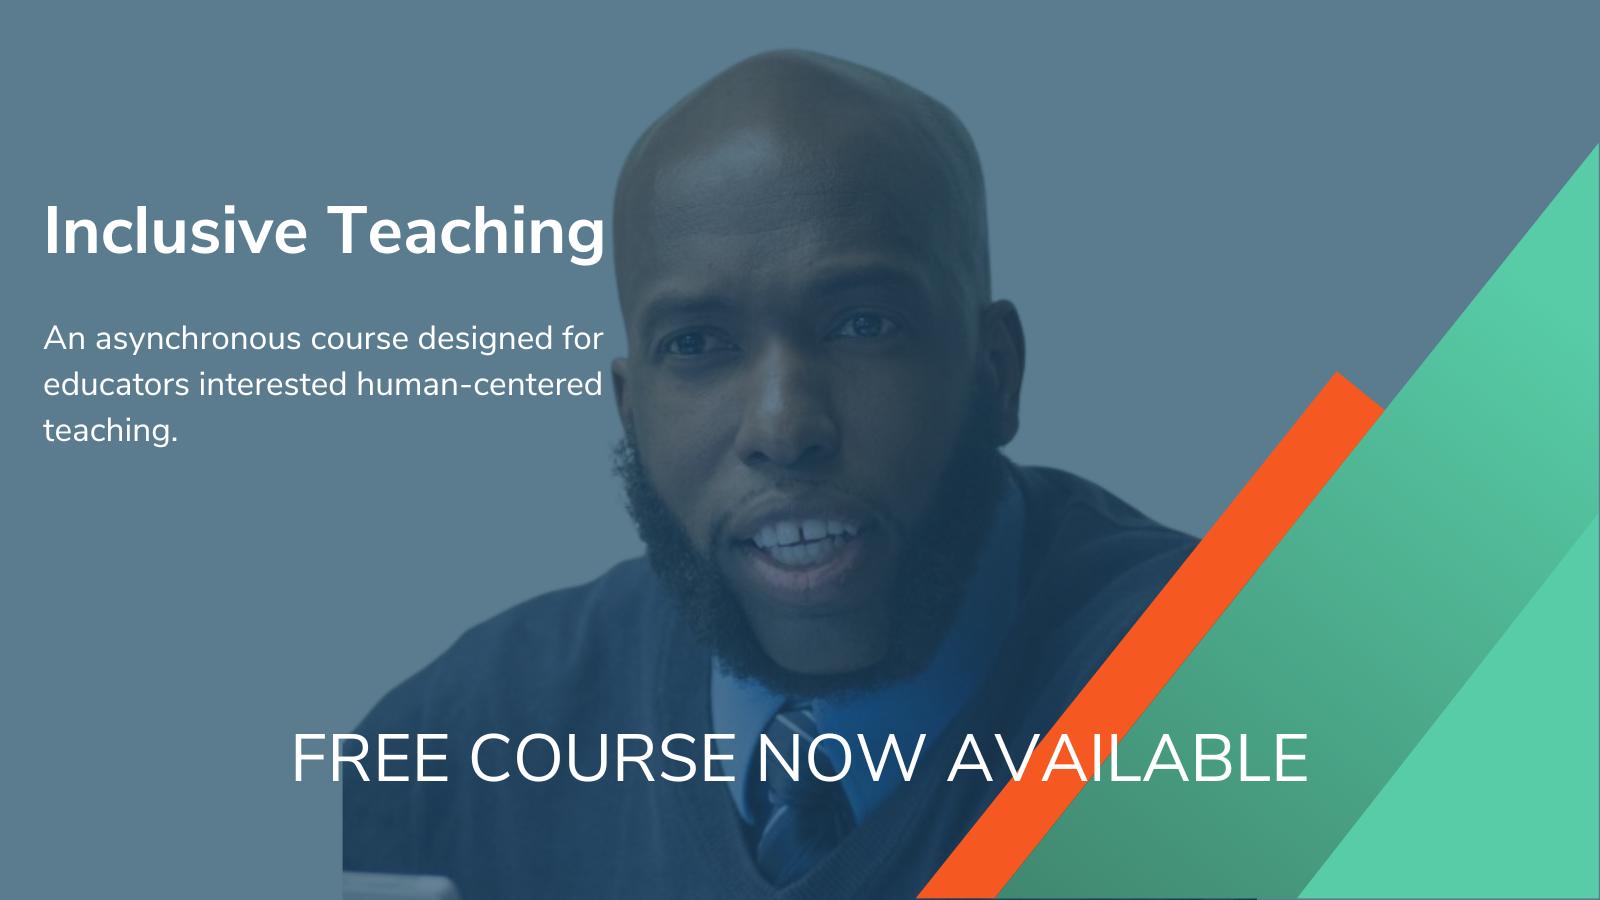 Inclusive Teaching. An asynchronous course designed for educators interested human-centered teaching. Free Course now available.